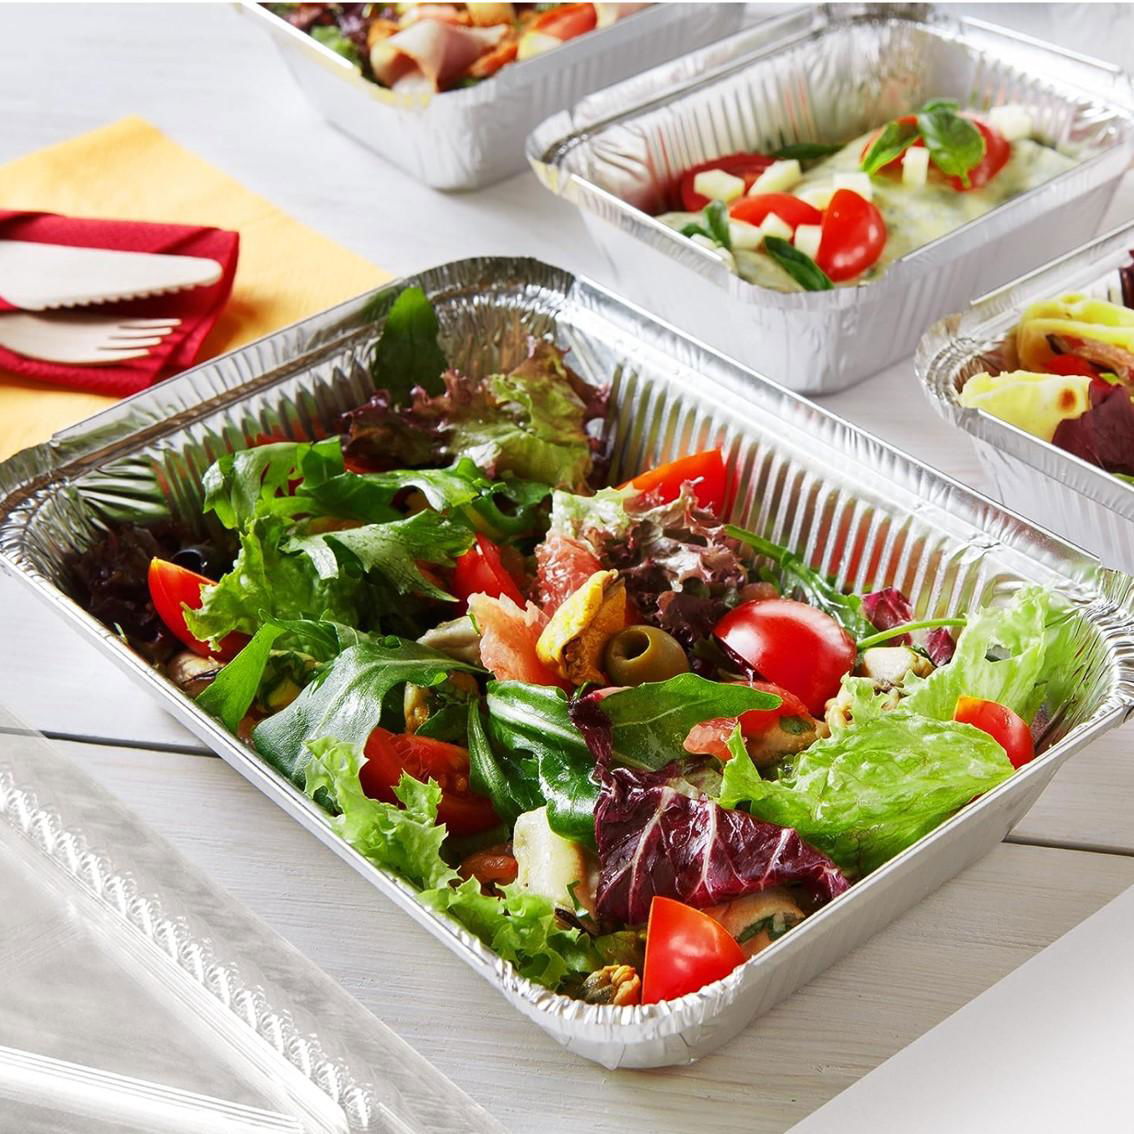 Sturdy reusable aluminum foil pan for takeout cooking reheating and storing food 5